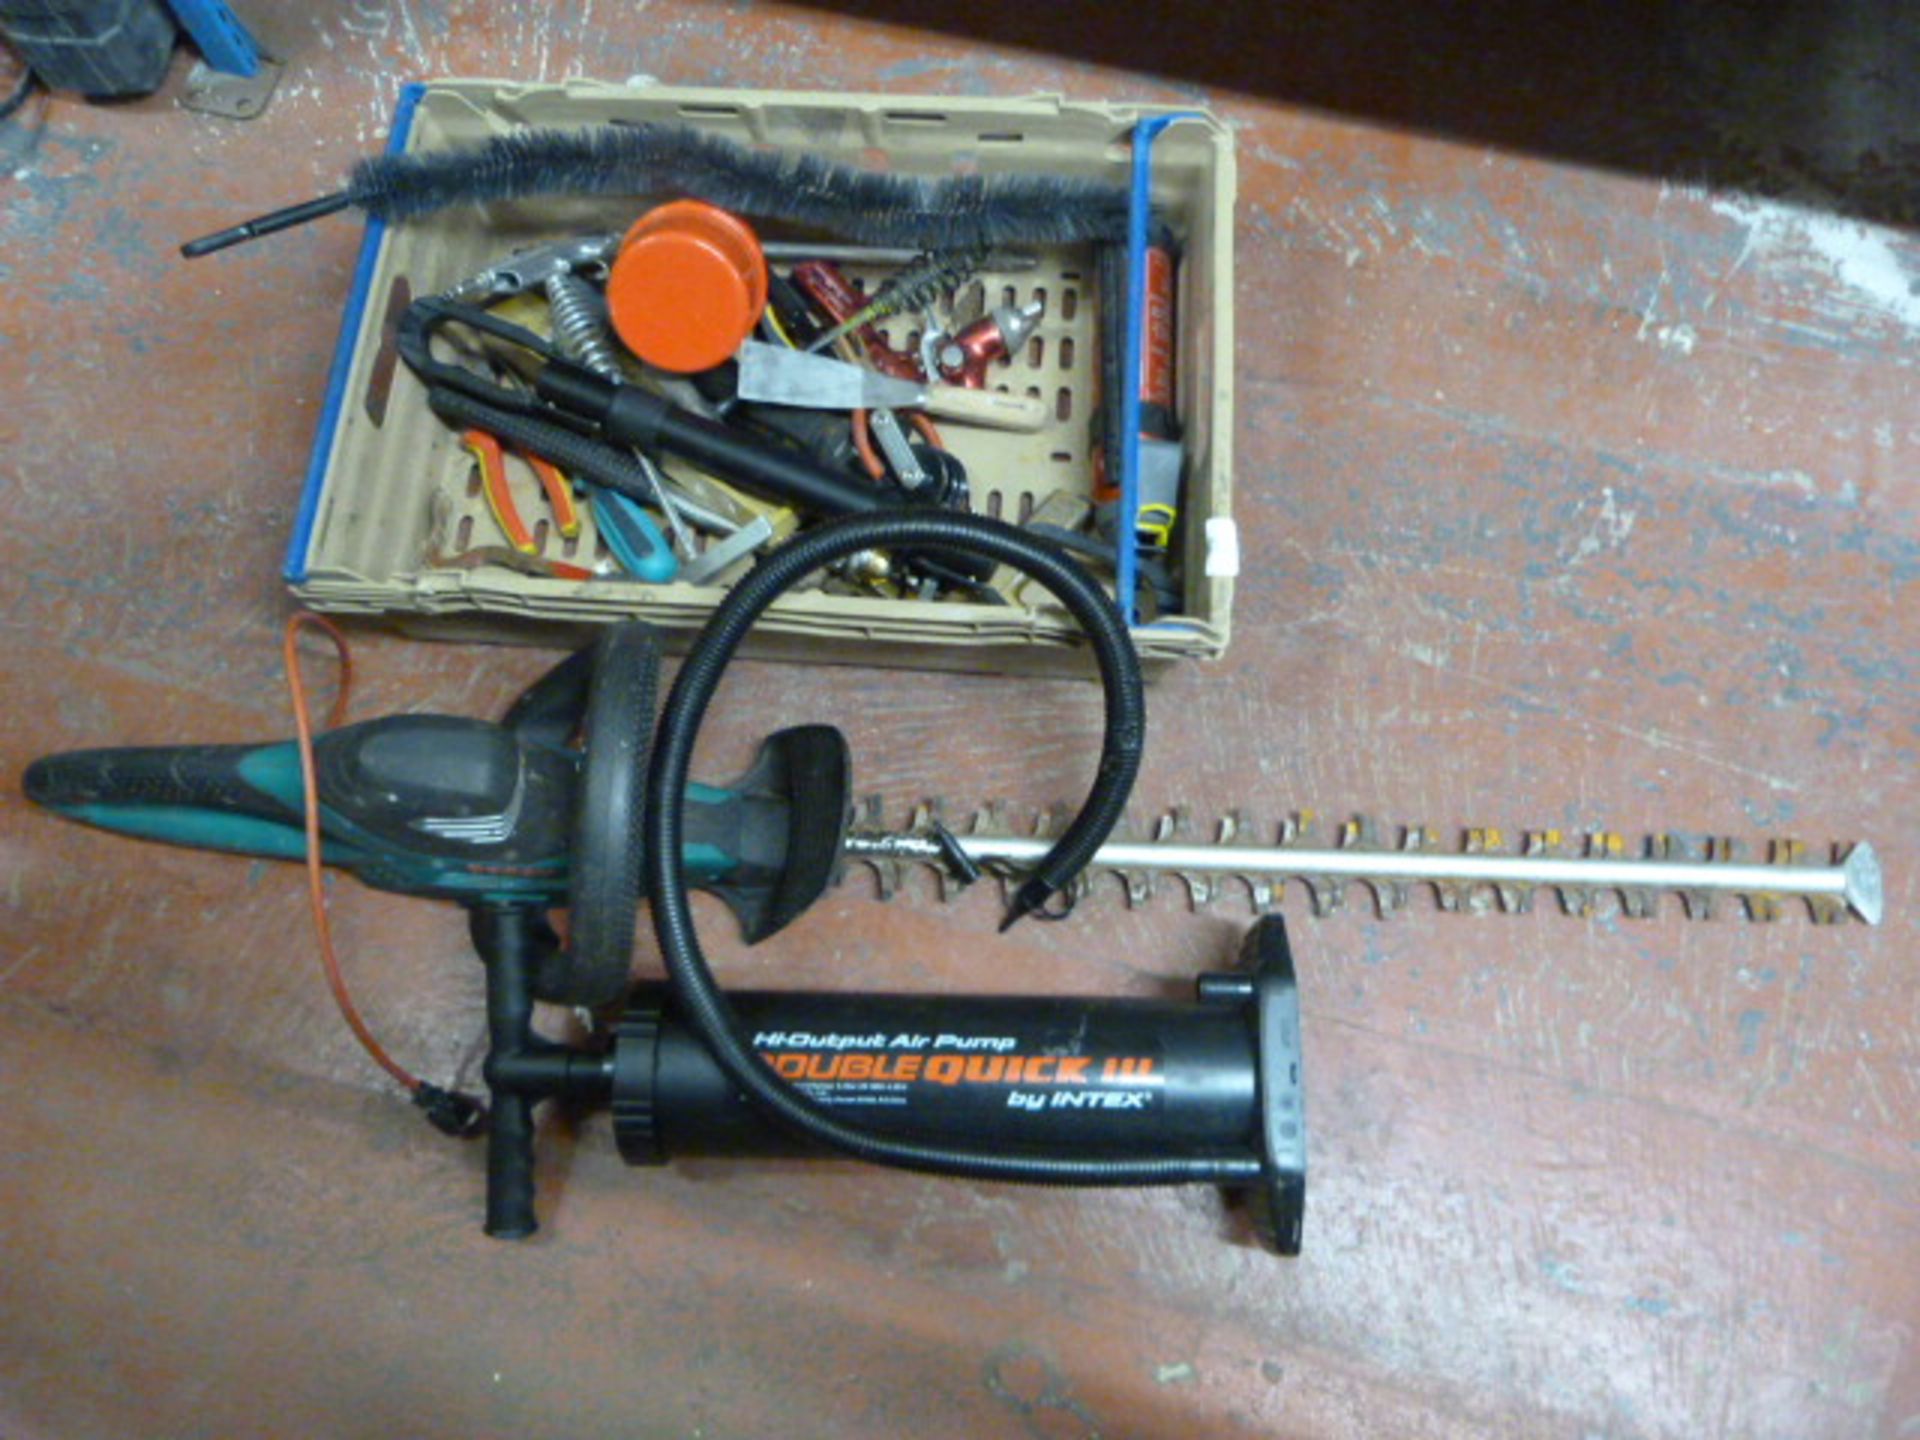 *Bosch Hedge Trimmer, Air Pump, and Assorted Tools